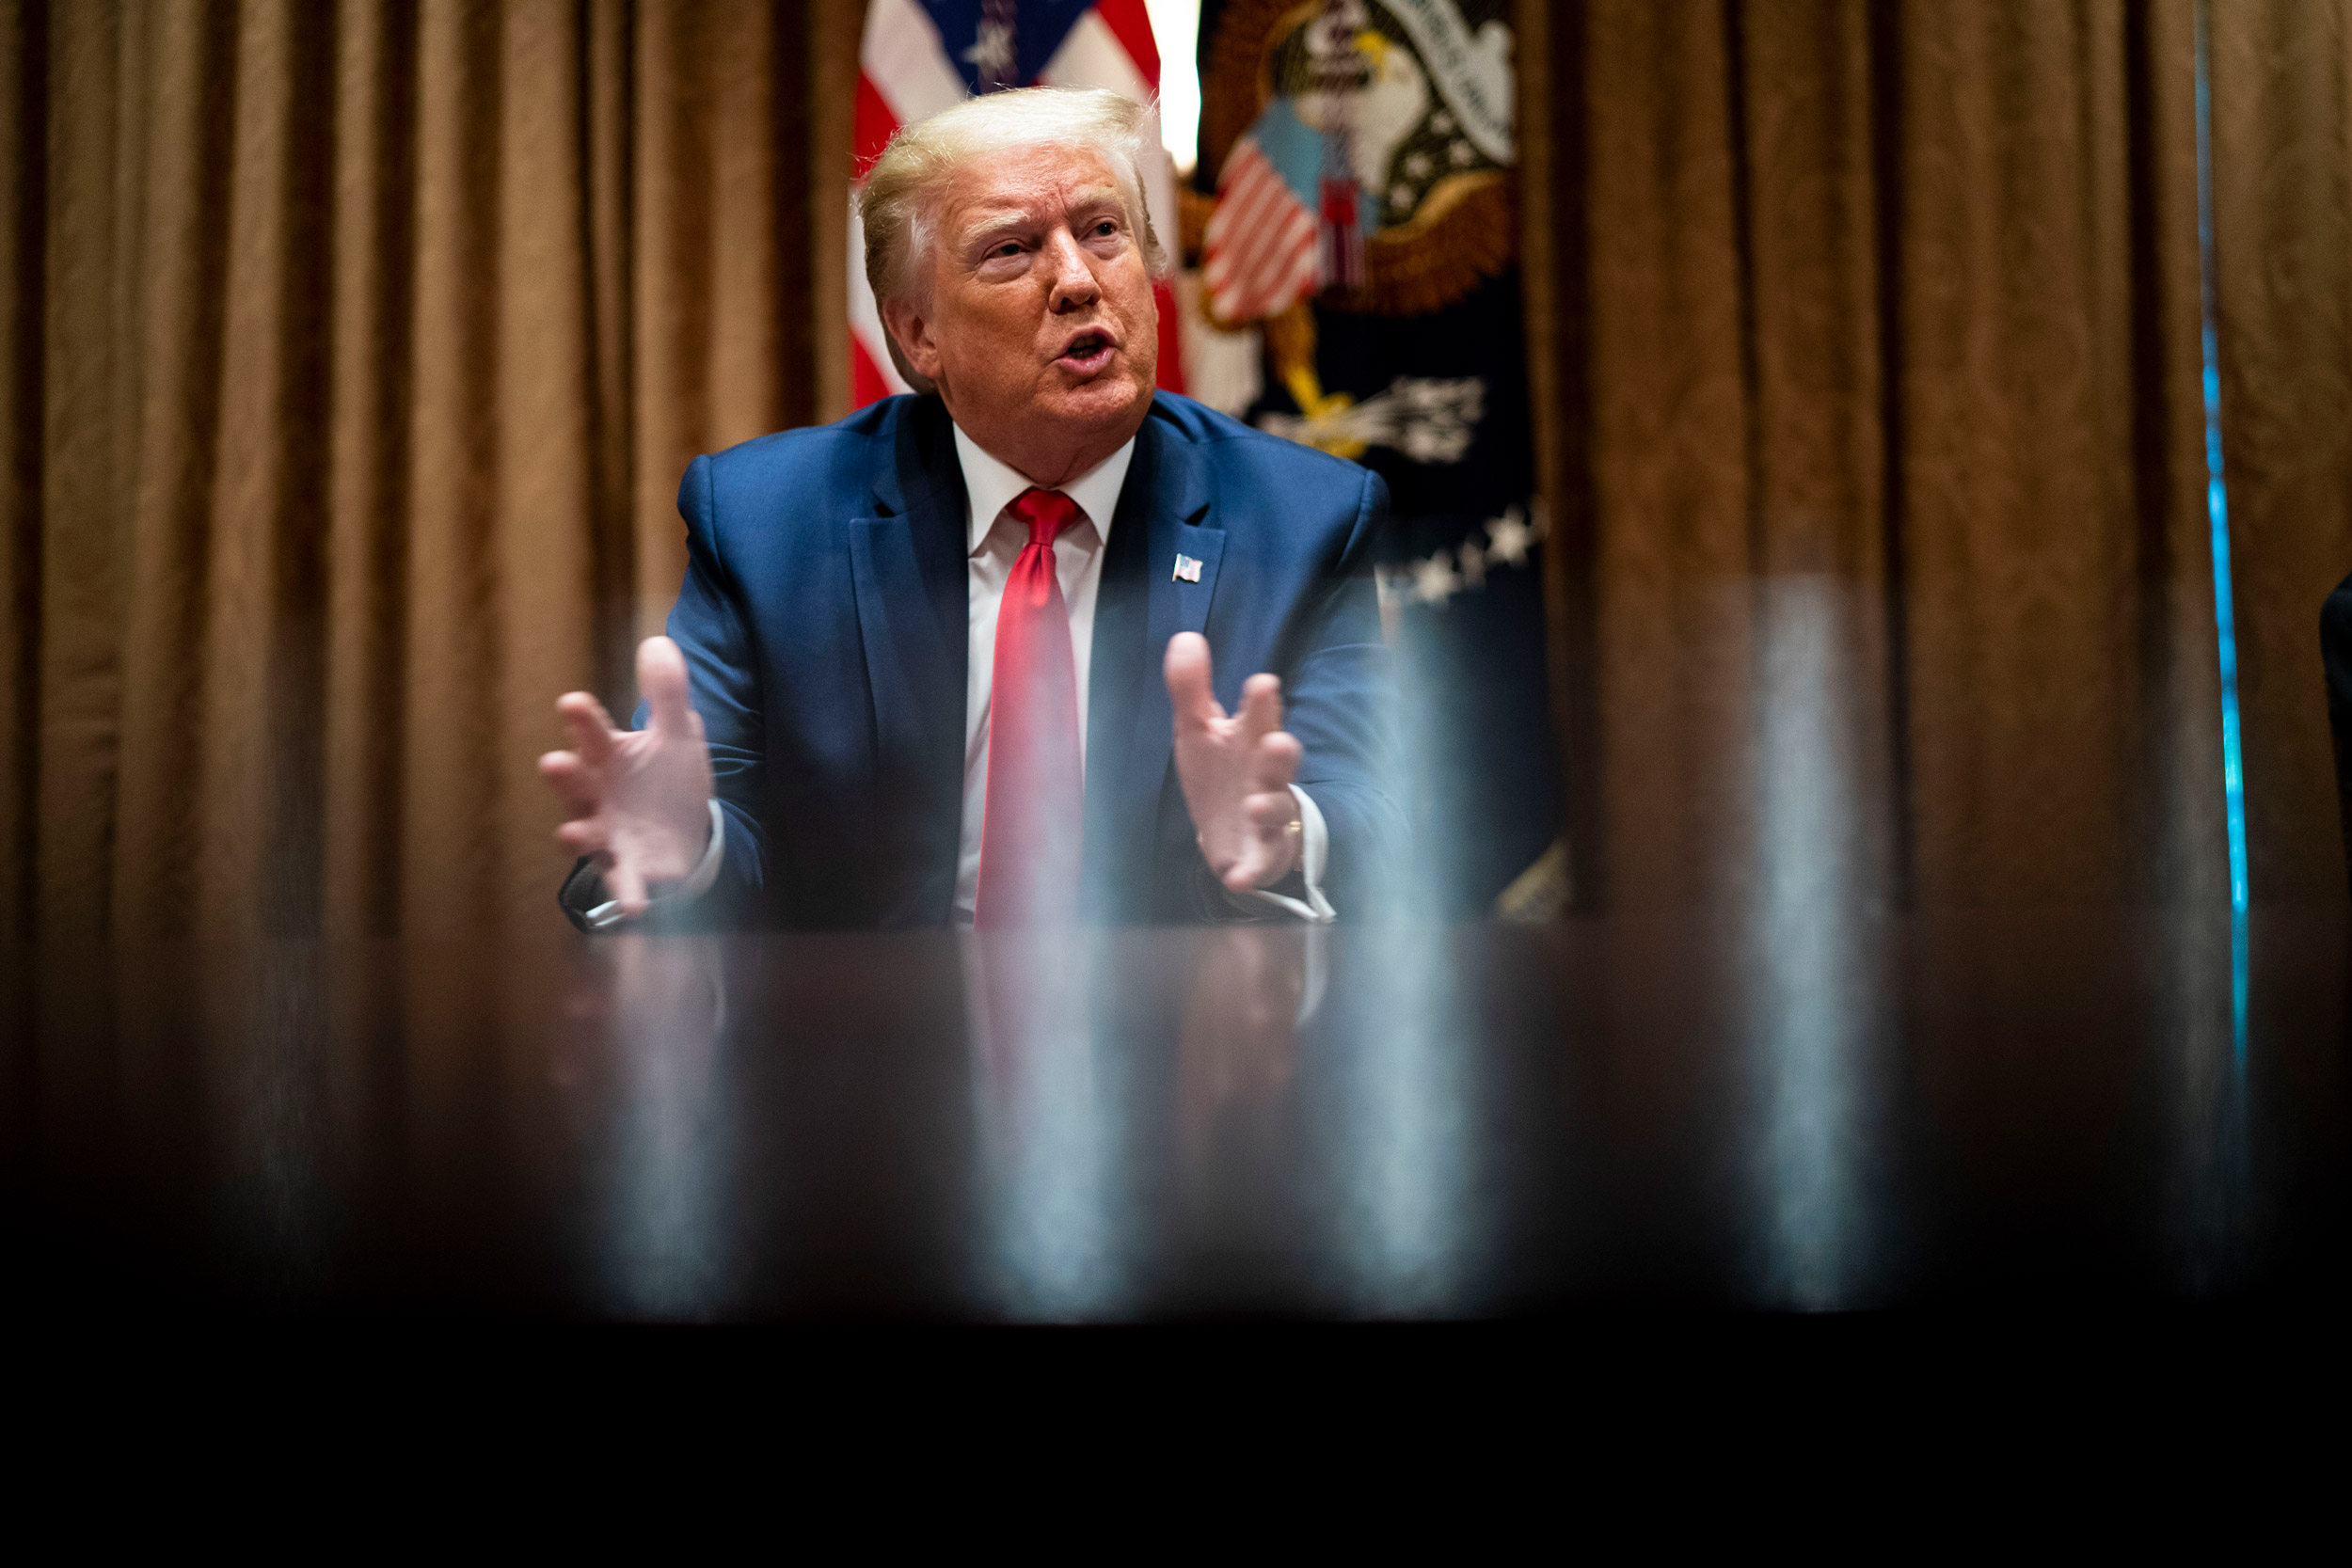 President Donald Trump speaks during a round table discussion in the Cabinet Room of the White House on June 10 in Washington.